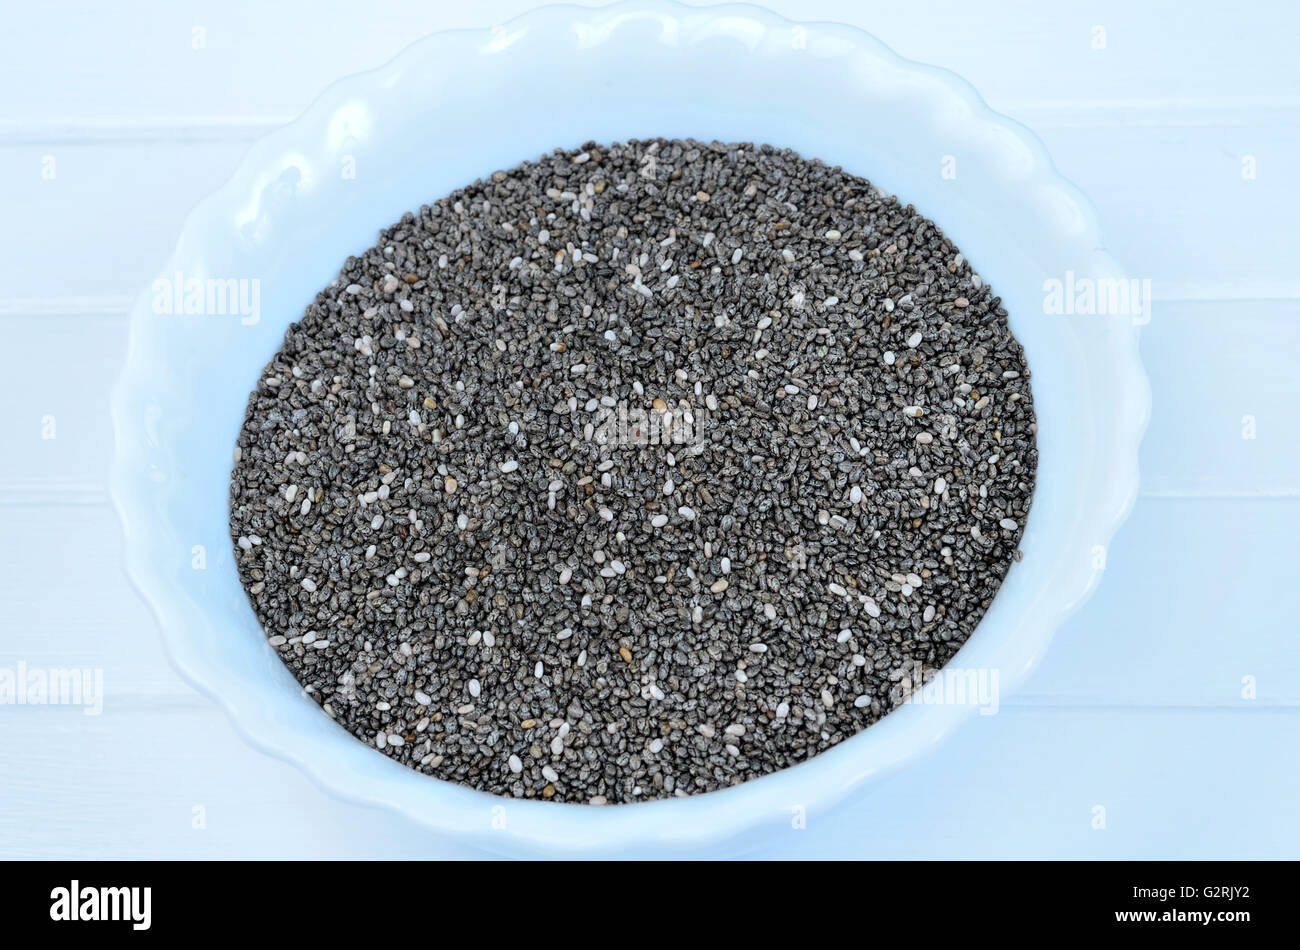 Chia seeds in a ceramic bowl on wooden table Stock Photo